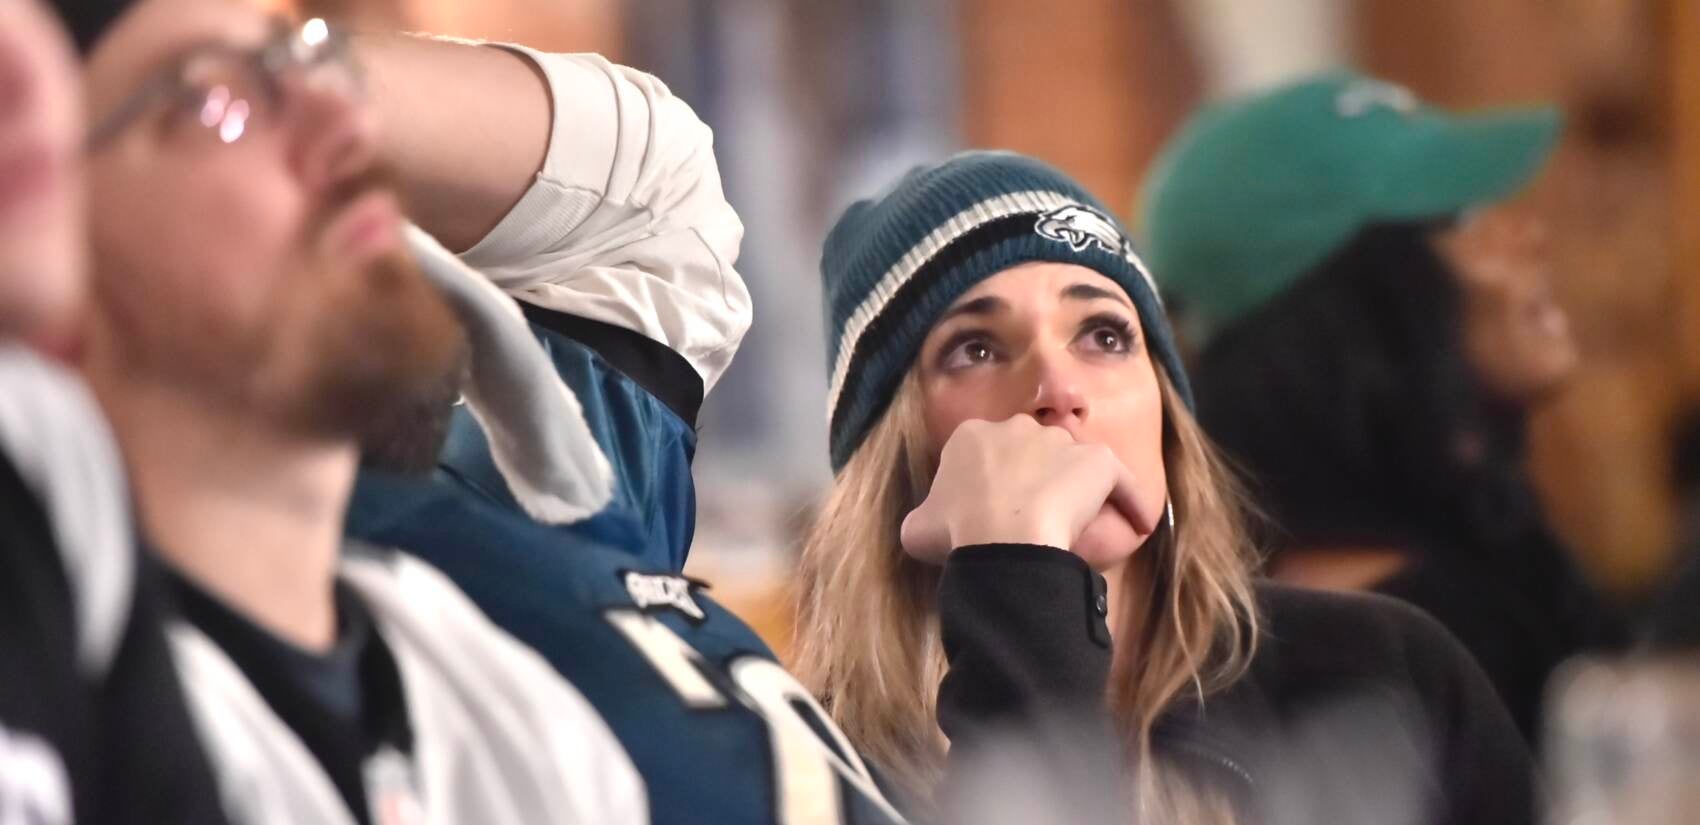 Eagles fans at Brauhaus Schmitz react after the team's Super Bowl LVII loss.(Jonathan Wilson for WHYY)